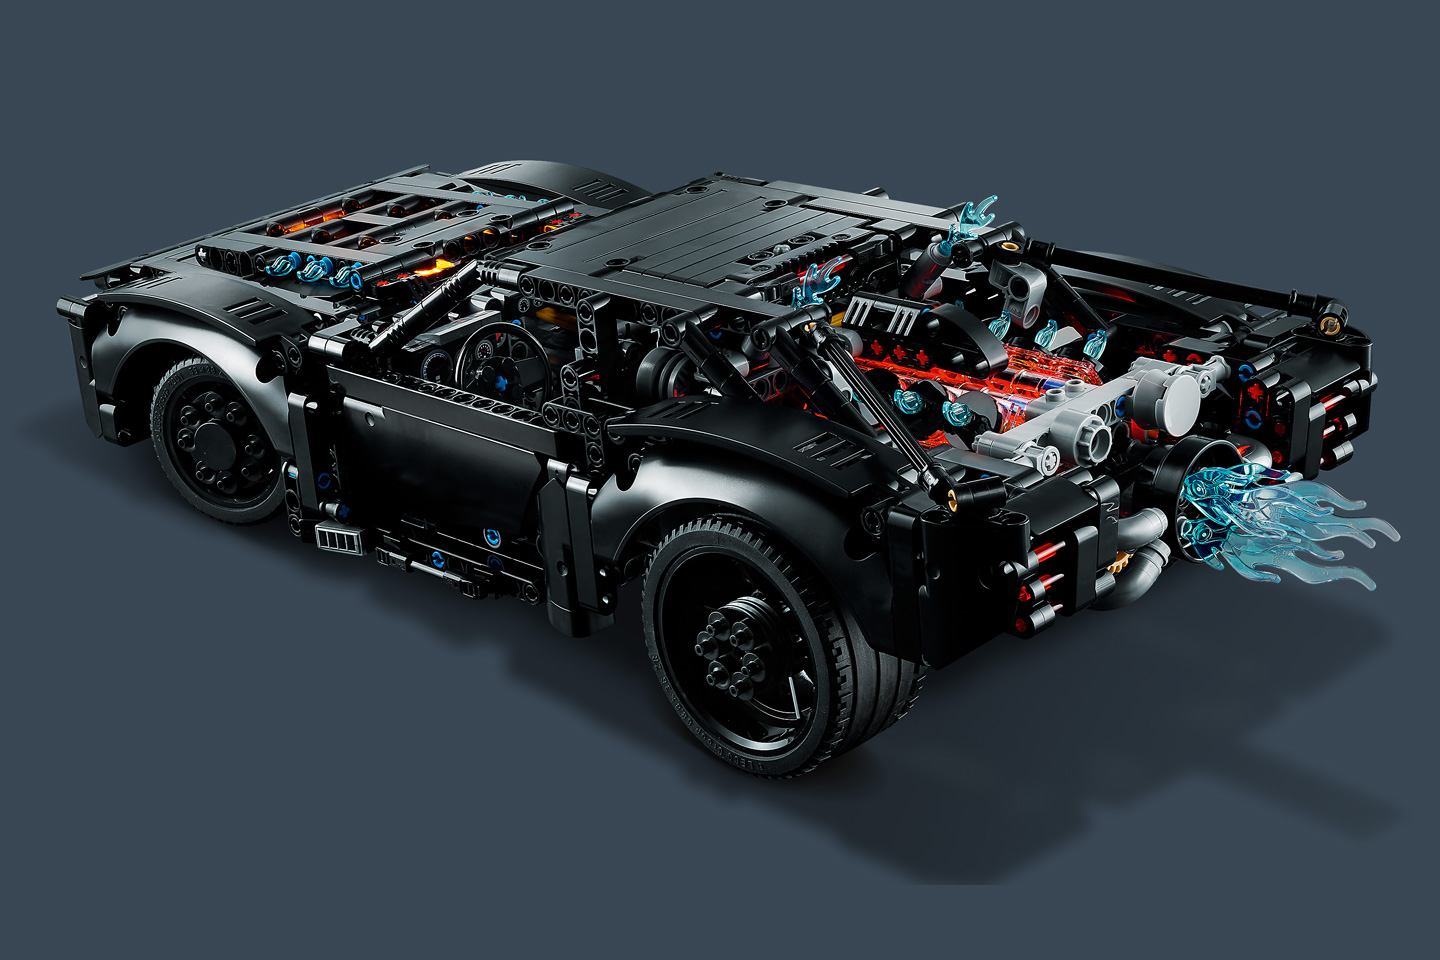 The new LEGO Technic batmobile is just as sinister as the one from. ‘The Batman’Film